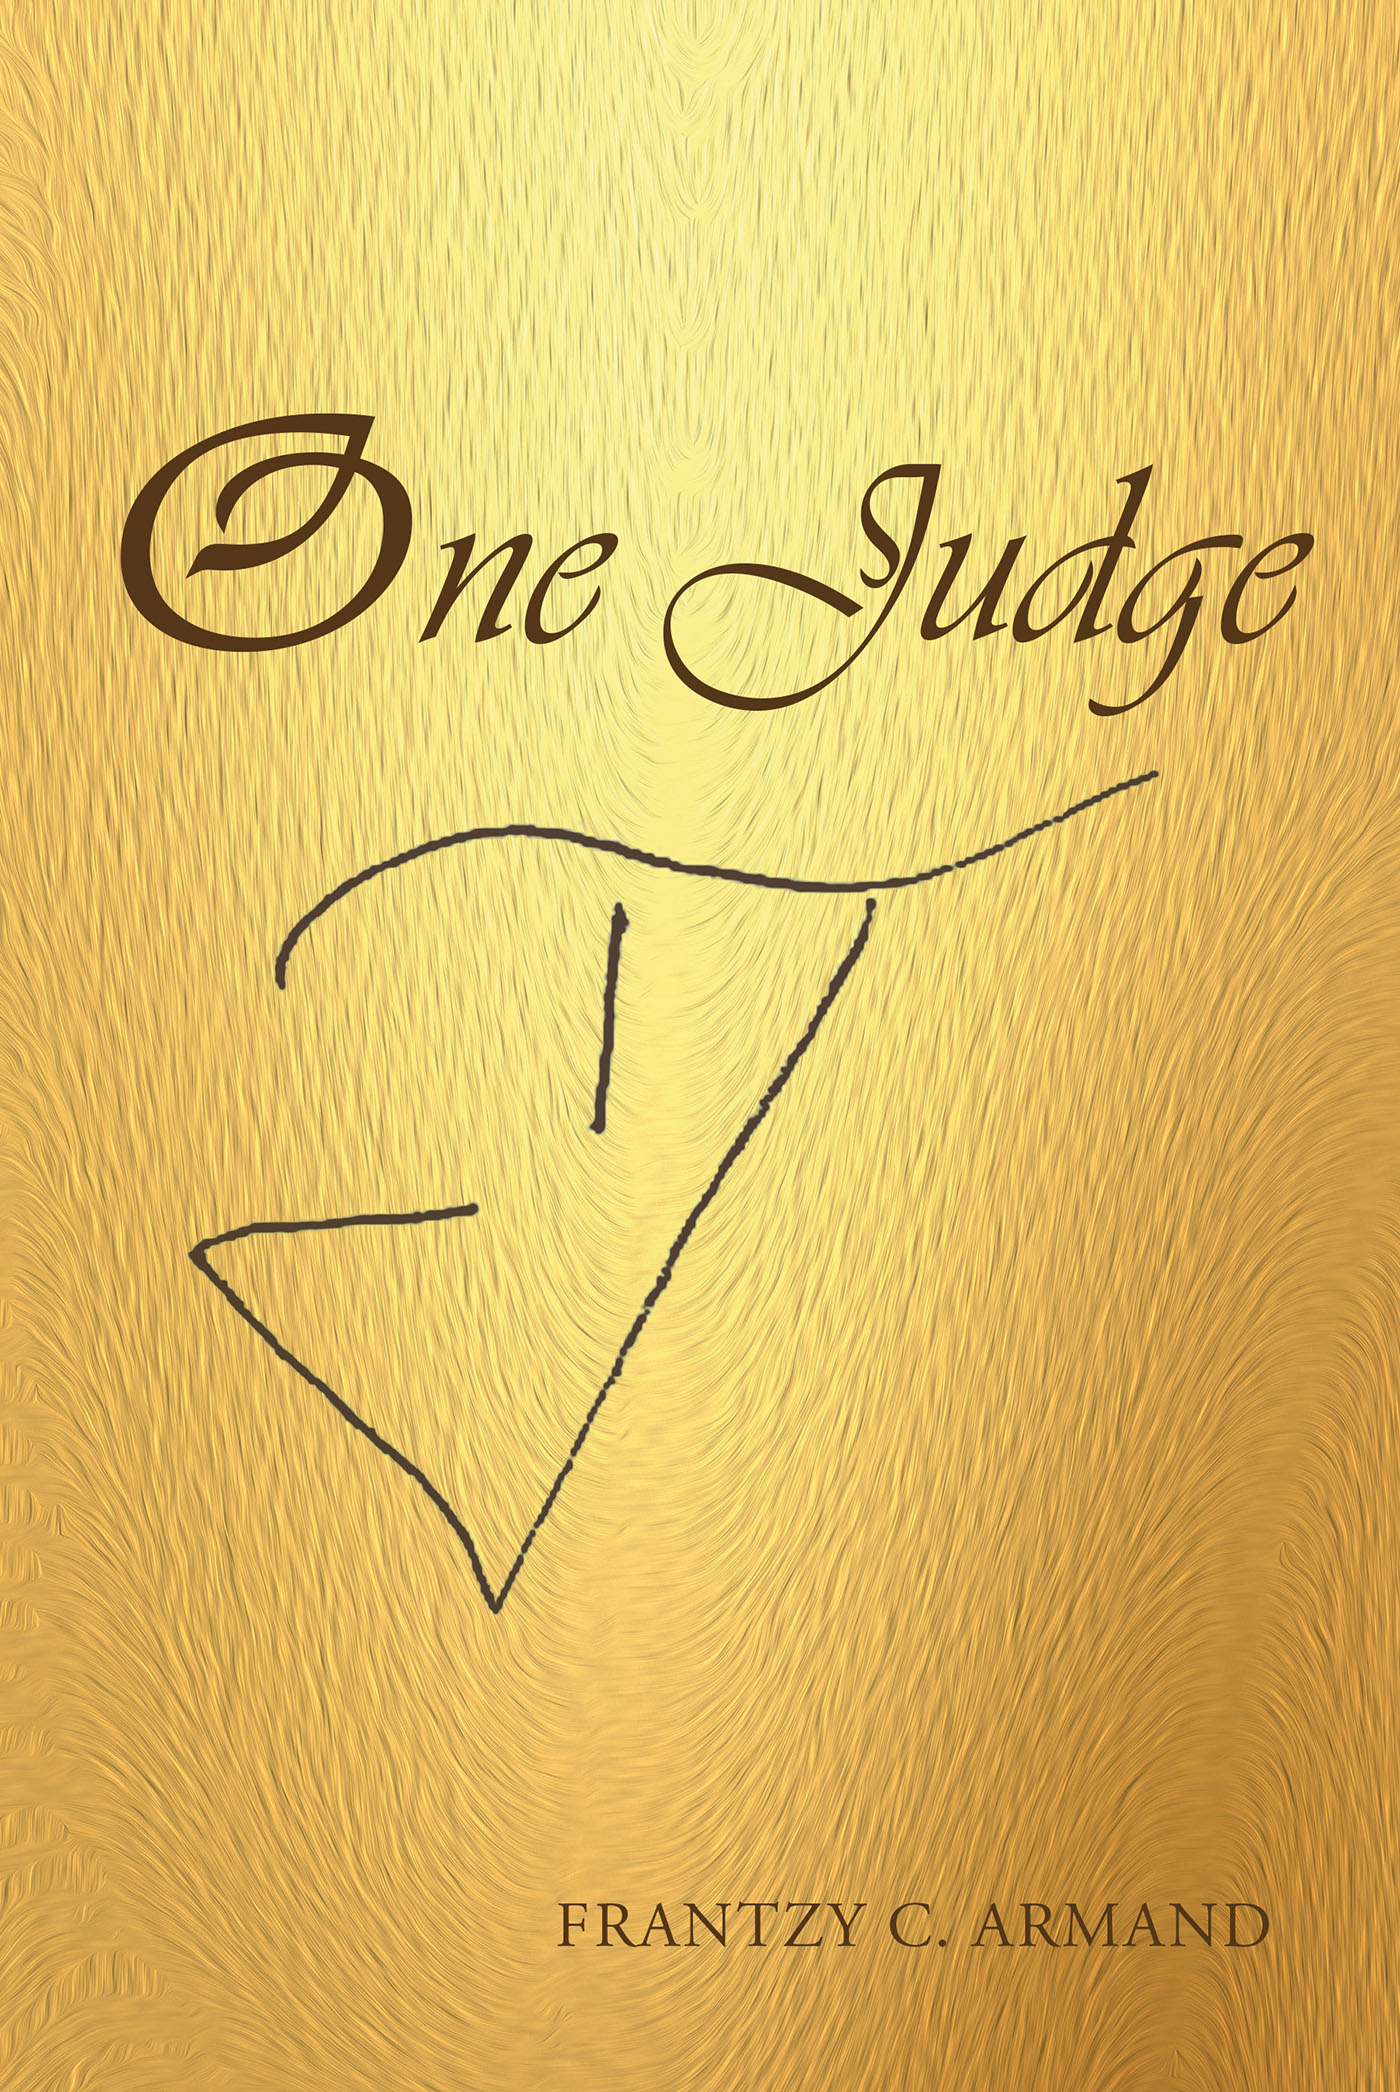 Author Frantzy C. Armand’s New Book, "One Judge," is a Great Read That Will Teach Readers How to Work Towards the Ultimate Goal of Reaching the So-Called Better Life